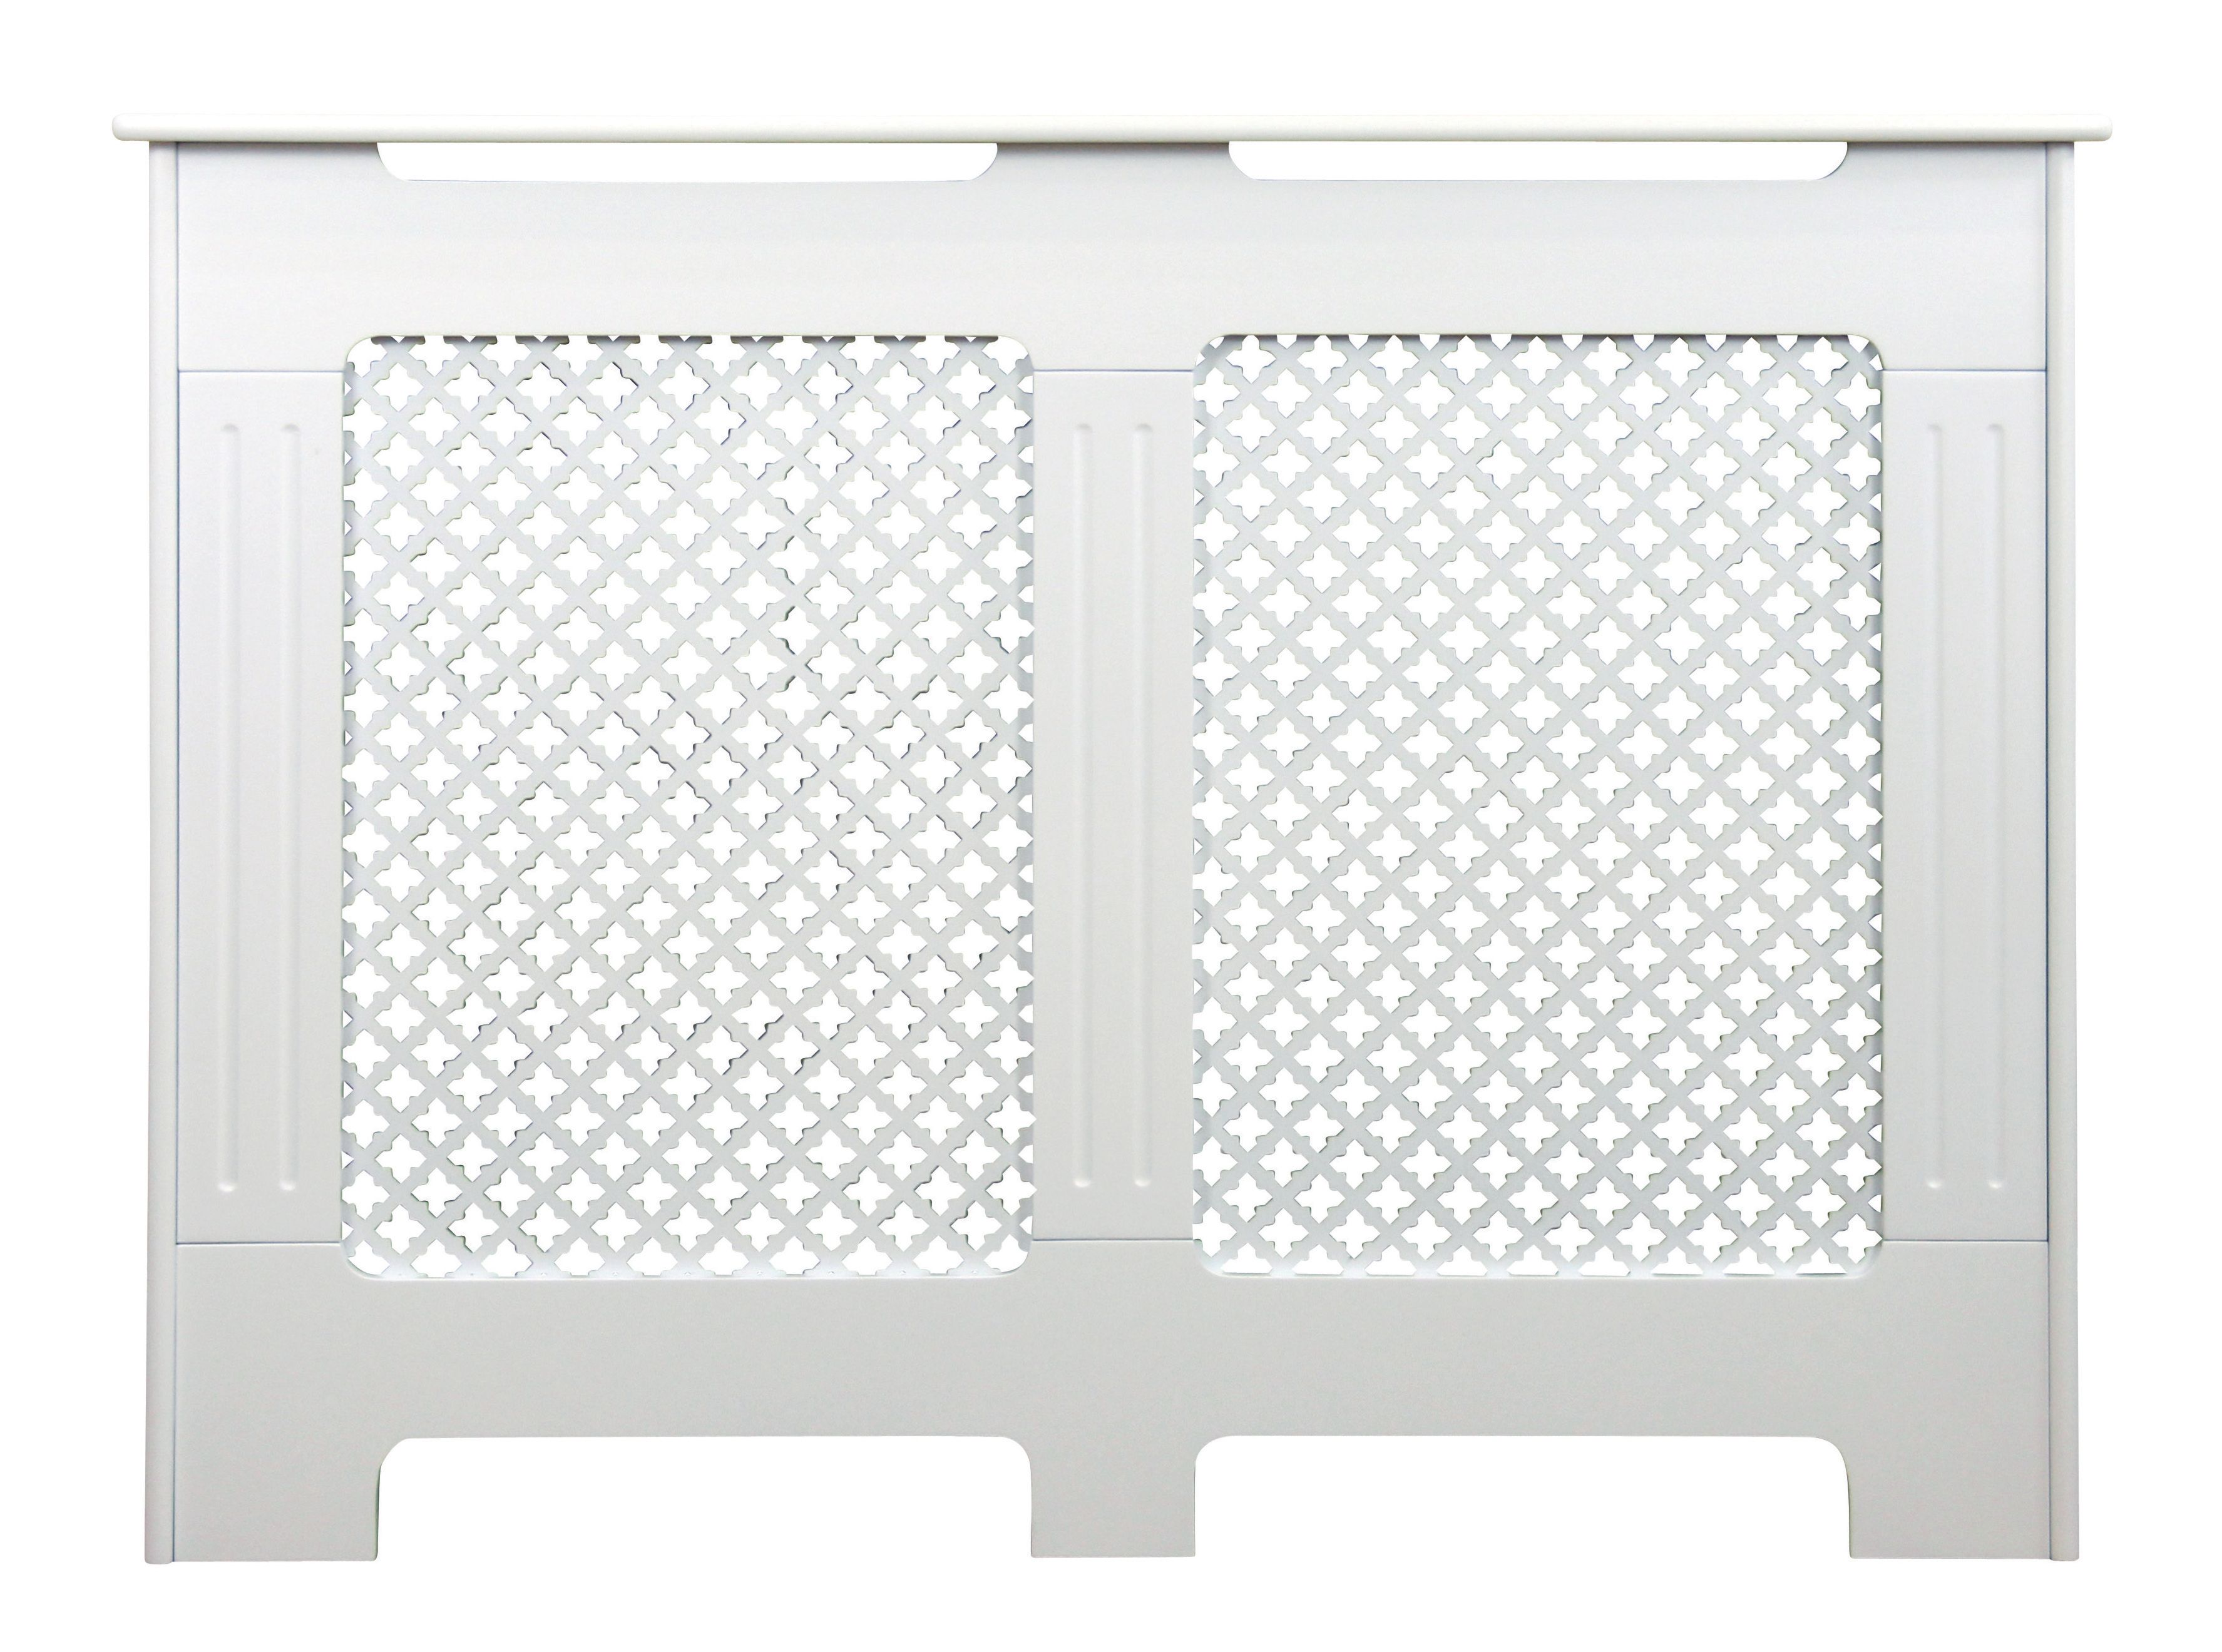 Image of Wickes Derwent Small Radiator Cover White - 1110 mm